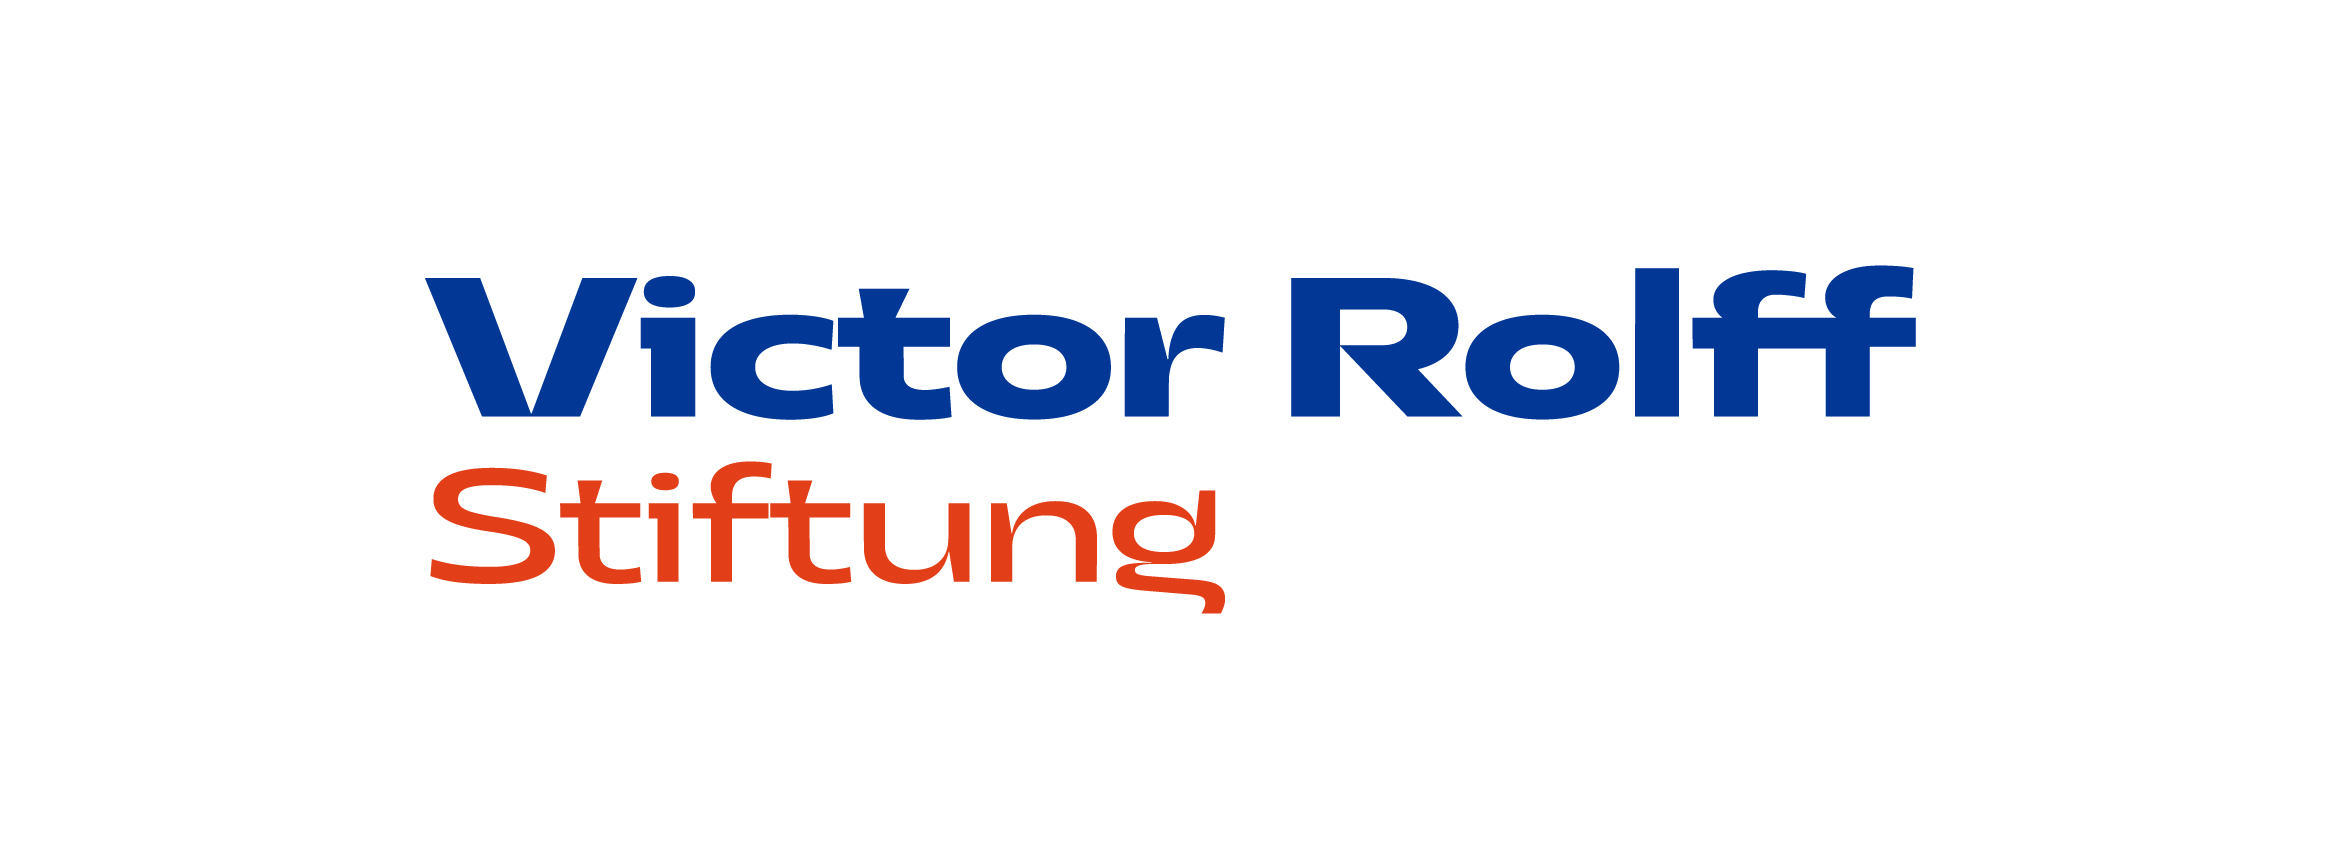 Victor Rolff Stiftung